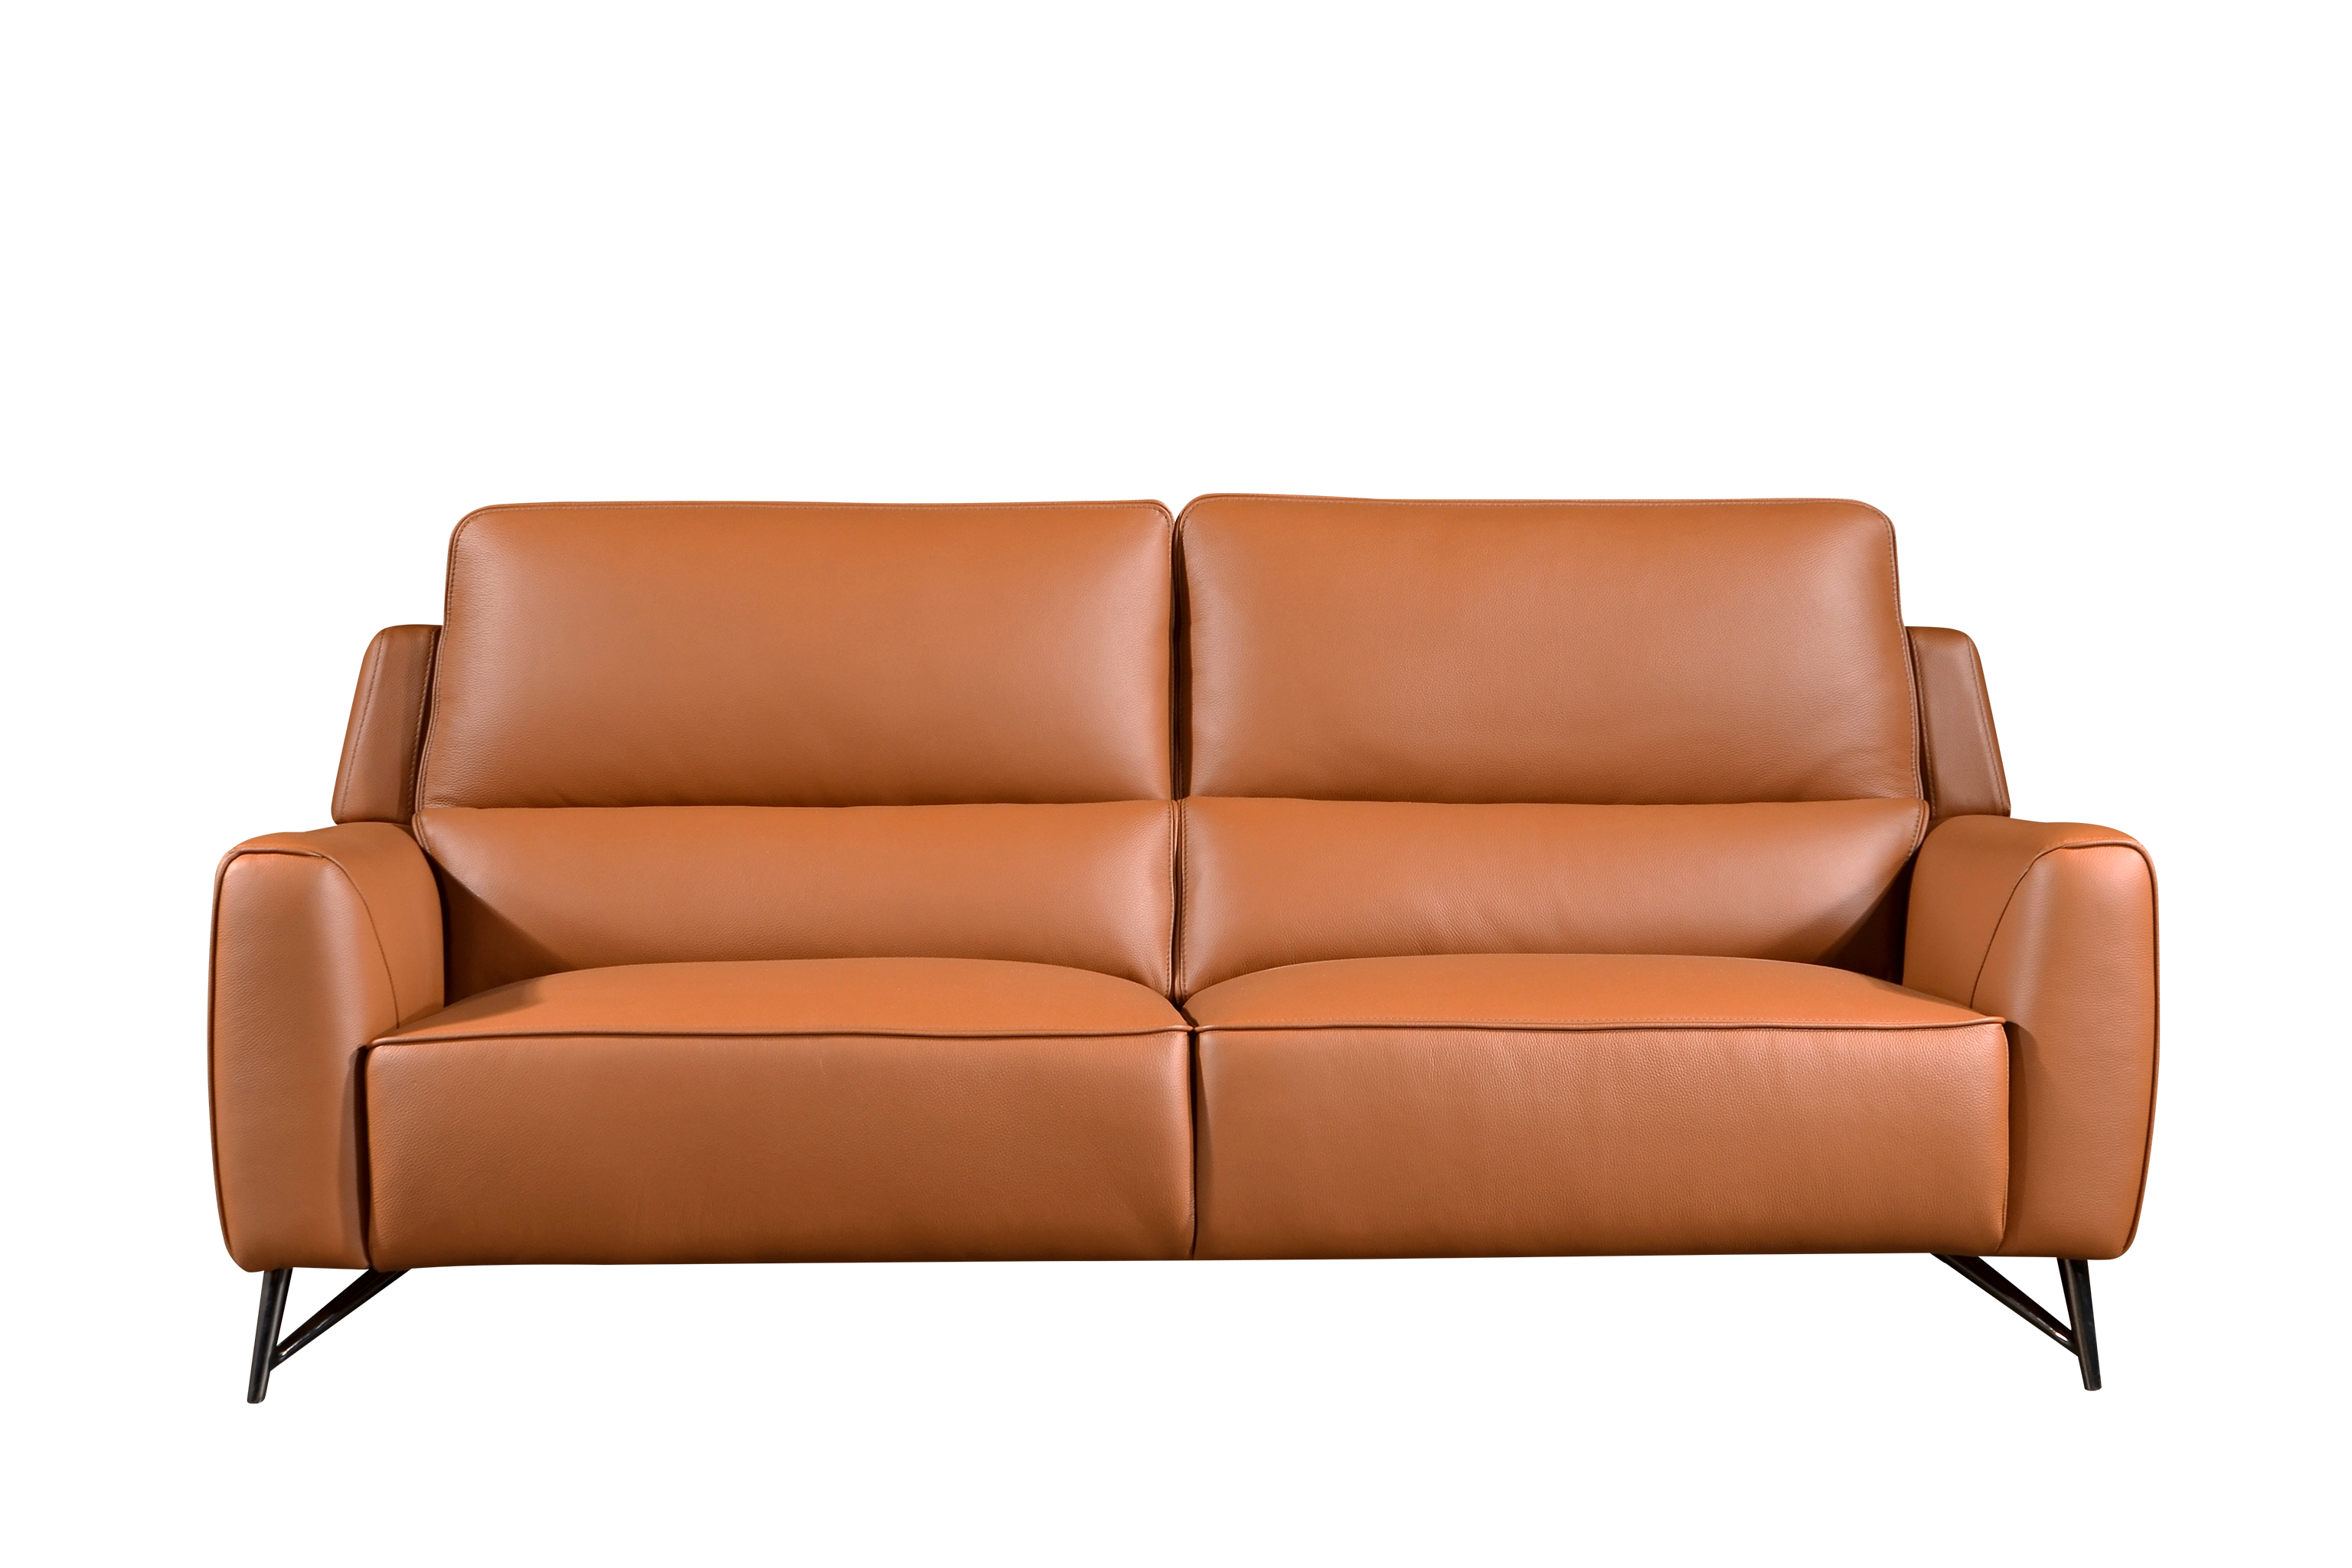 NICO 3 Seater Sofa in Leather by Castilla